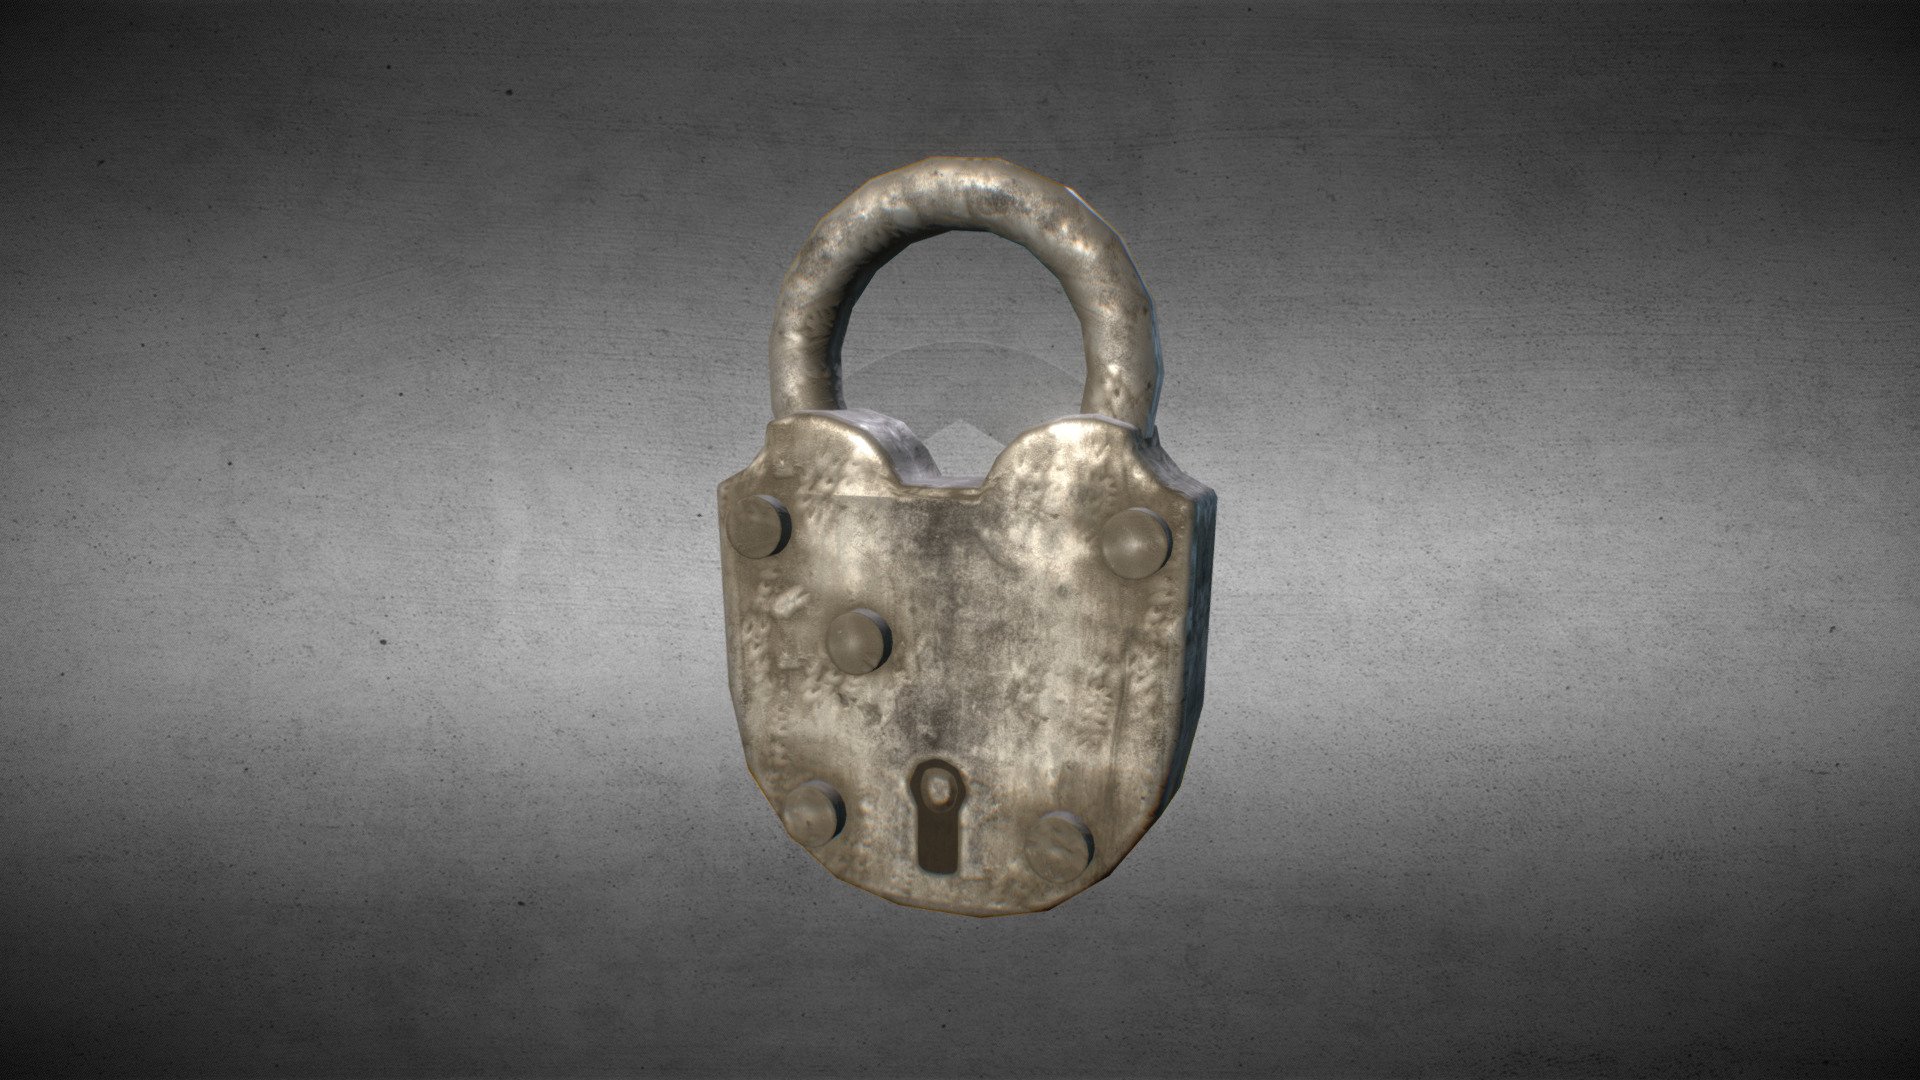 Low poly padlock.

2048x PBR and UE4 ready texture: Albedo, Specular, Metallic, Roughness, Normal 3d model